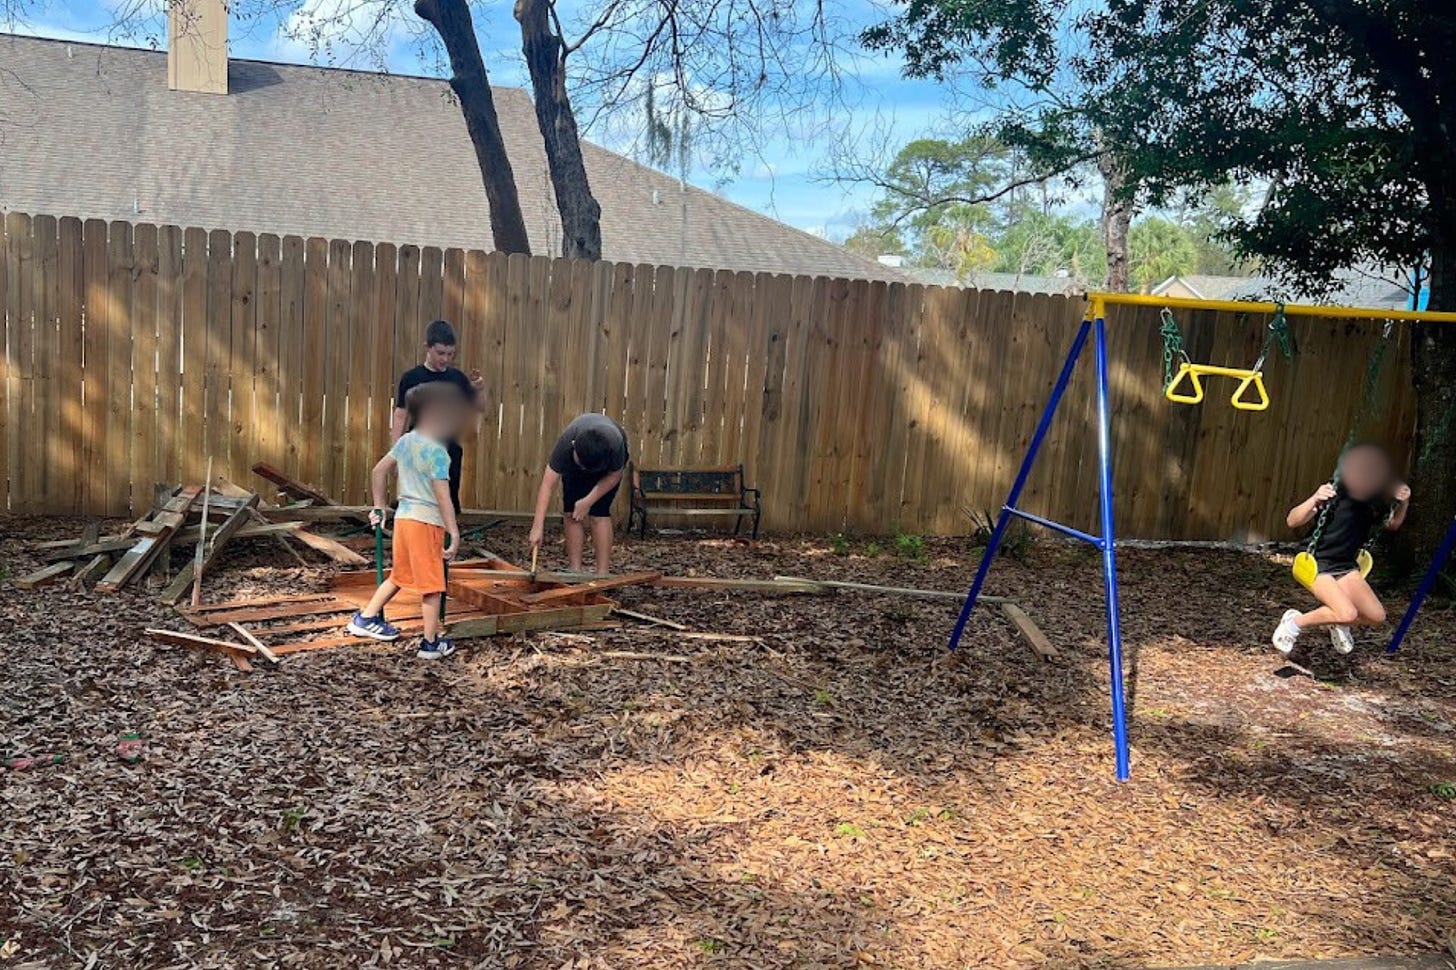 A partially dismantled wooden playground structure in a backyard, with children engaged in what appears to be demolition work. A child is seen swinging nearby, suggesting a juxtaposition of play and work in the open, sunlit space bordered by a wooden fence and trees.